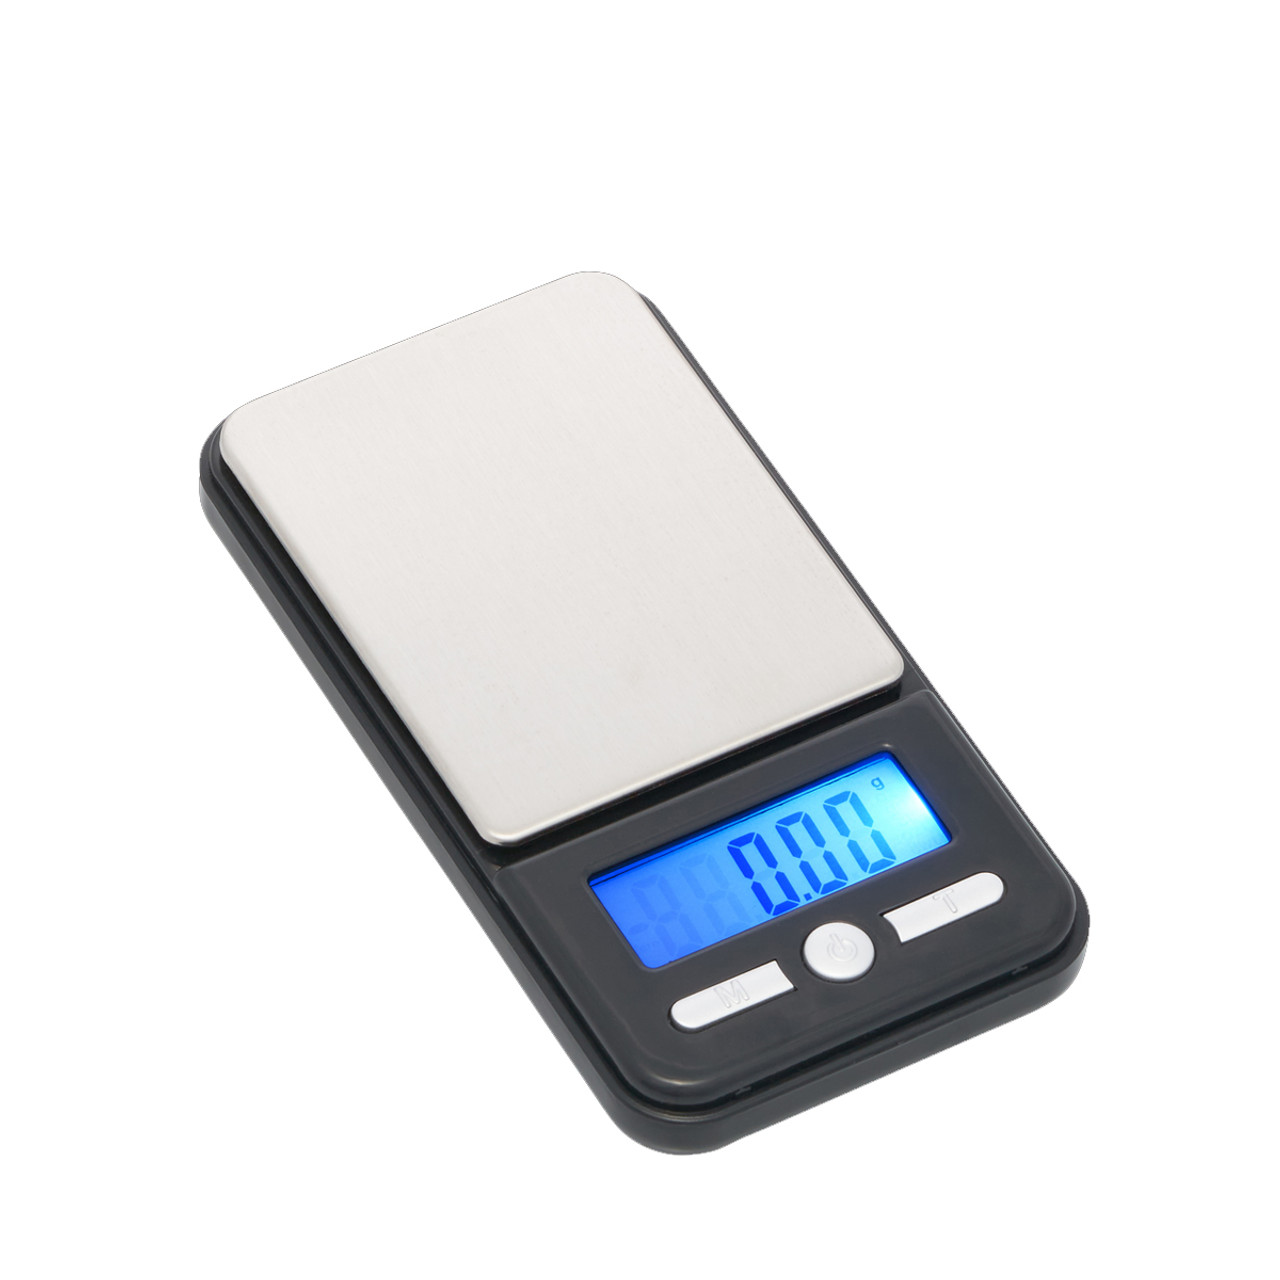 American weigh Scale - MAX Series - Compact Portable Pocket Scale |Gram  Scale Small Food| Jewelry Scale - 150 G x 0.1 G - Black Stainless Steel